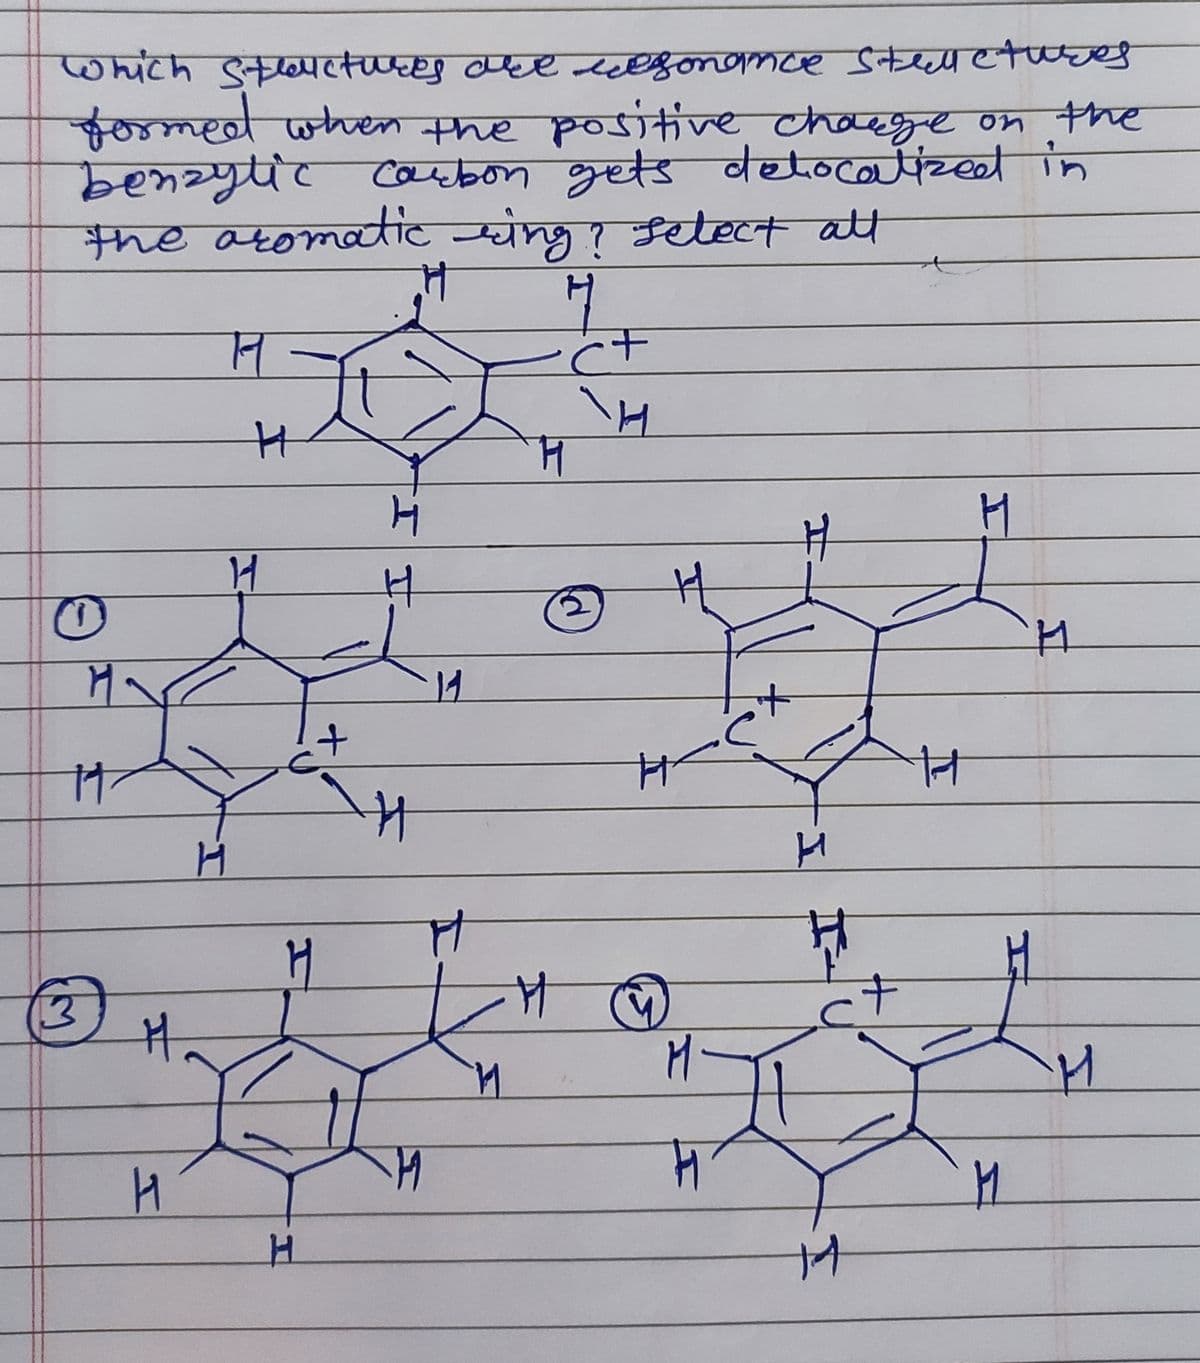 Which Structures are resonance stellctures
formed when the positive charge on the
benzytic Carbon gets detocavtizeet in
the aromatic ring? select all
H
न
c+
\H
H
H
O
11
13
H.
H
H
H
H
H
+
I
H
#
H
11
P
111
11
Ħ
H₂
M-
म
H
H
14
H
M1
H
H